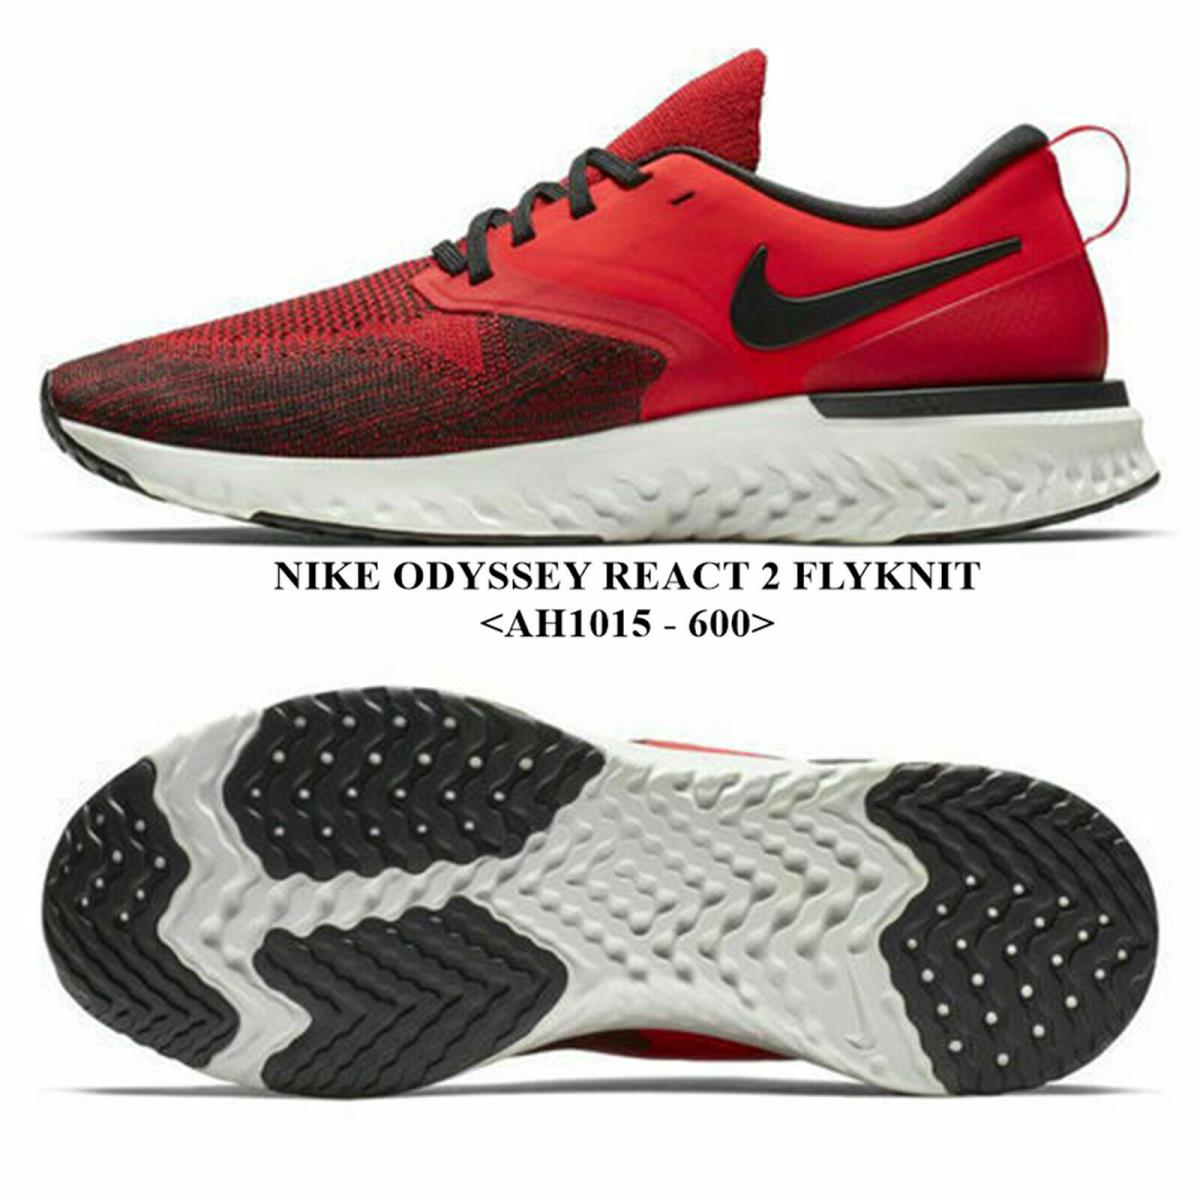 Nike Odyssey React 2 Flyknit <AH1015 - 600> Men`s Running Shoes.new with Box - UNIVERSITY RED / BLACK , UNIVERSITY RED / BLACK Manufacturer